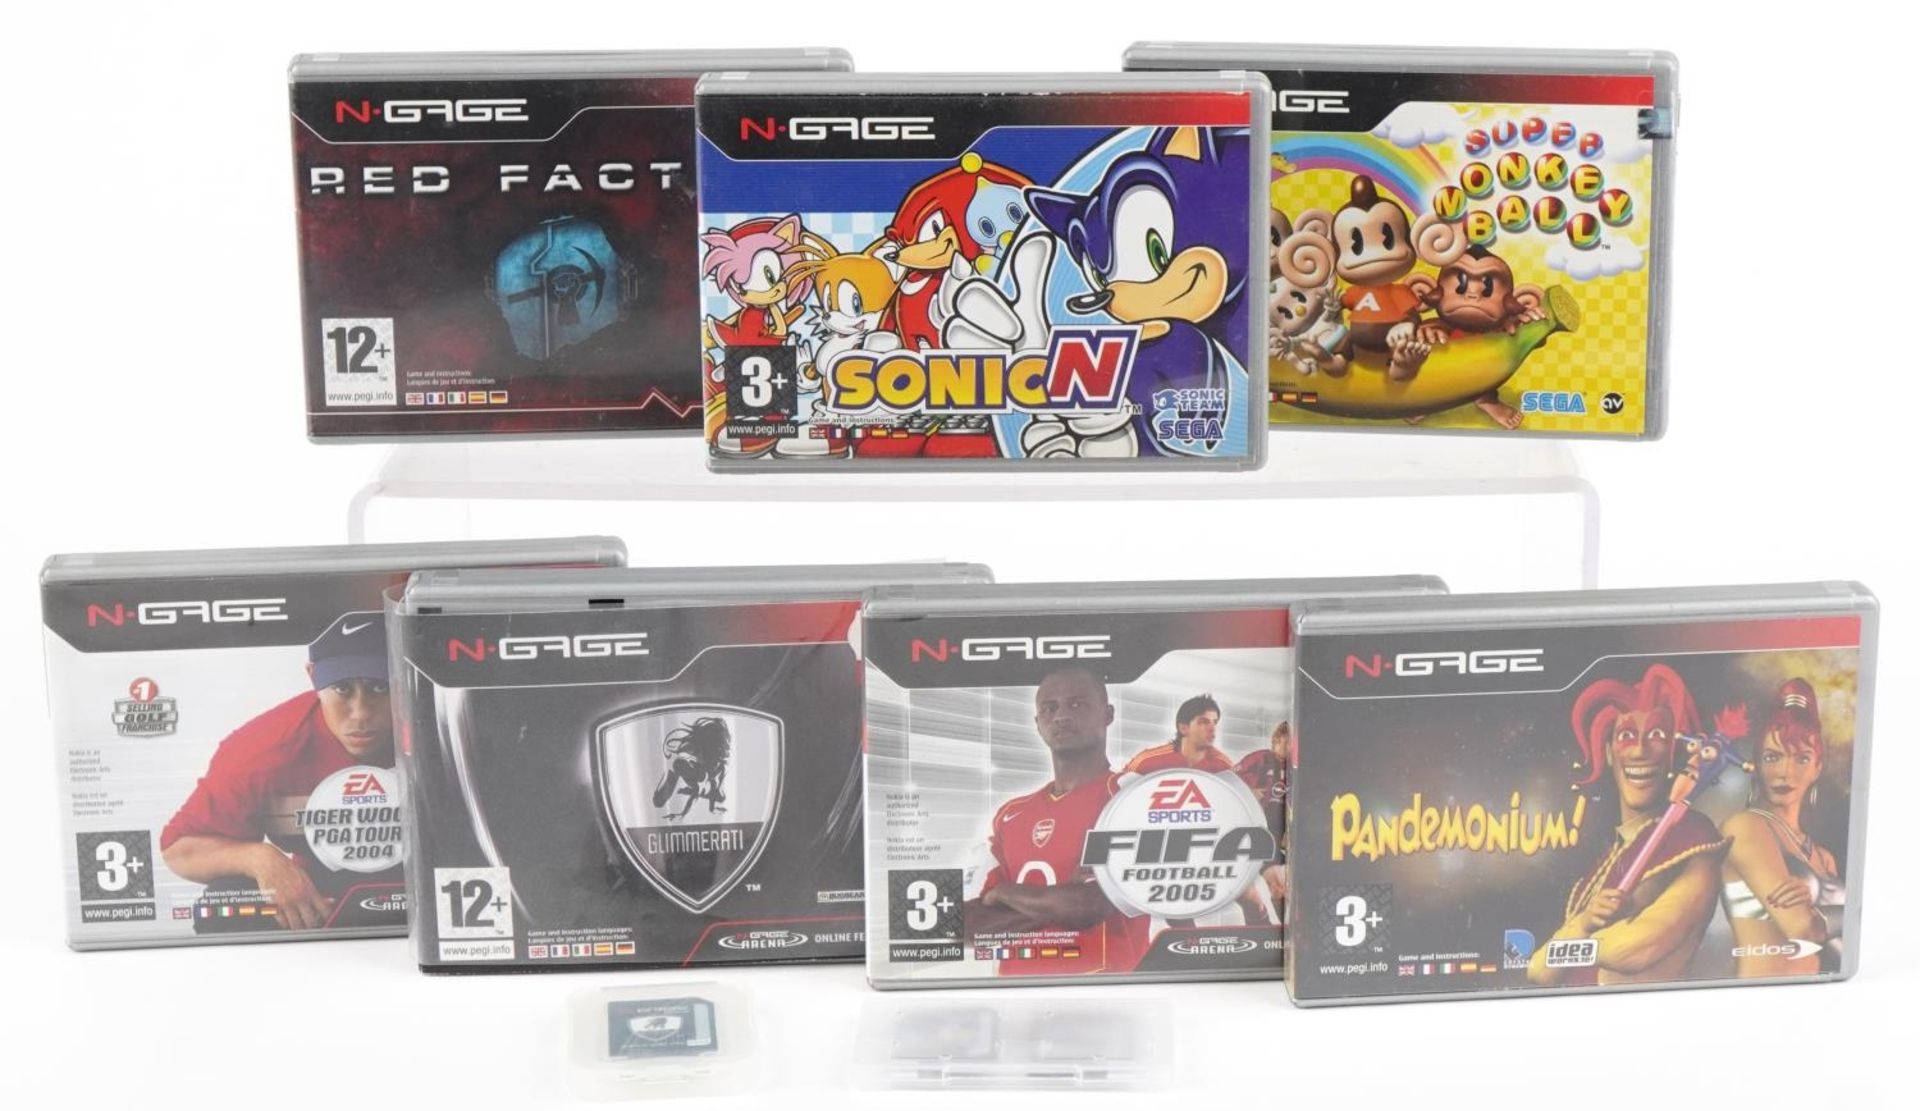 Vintage Nokia N-Gage games, predominantly with cases, including Glimmerati, Pandemonium, Super